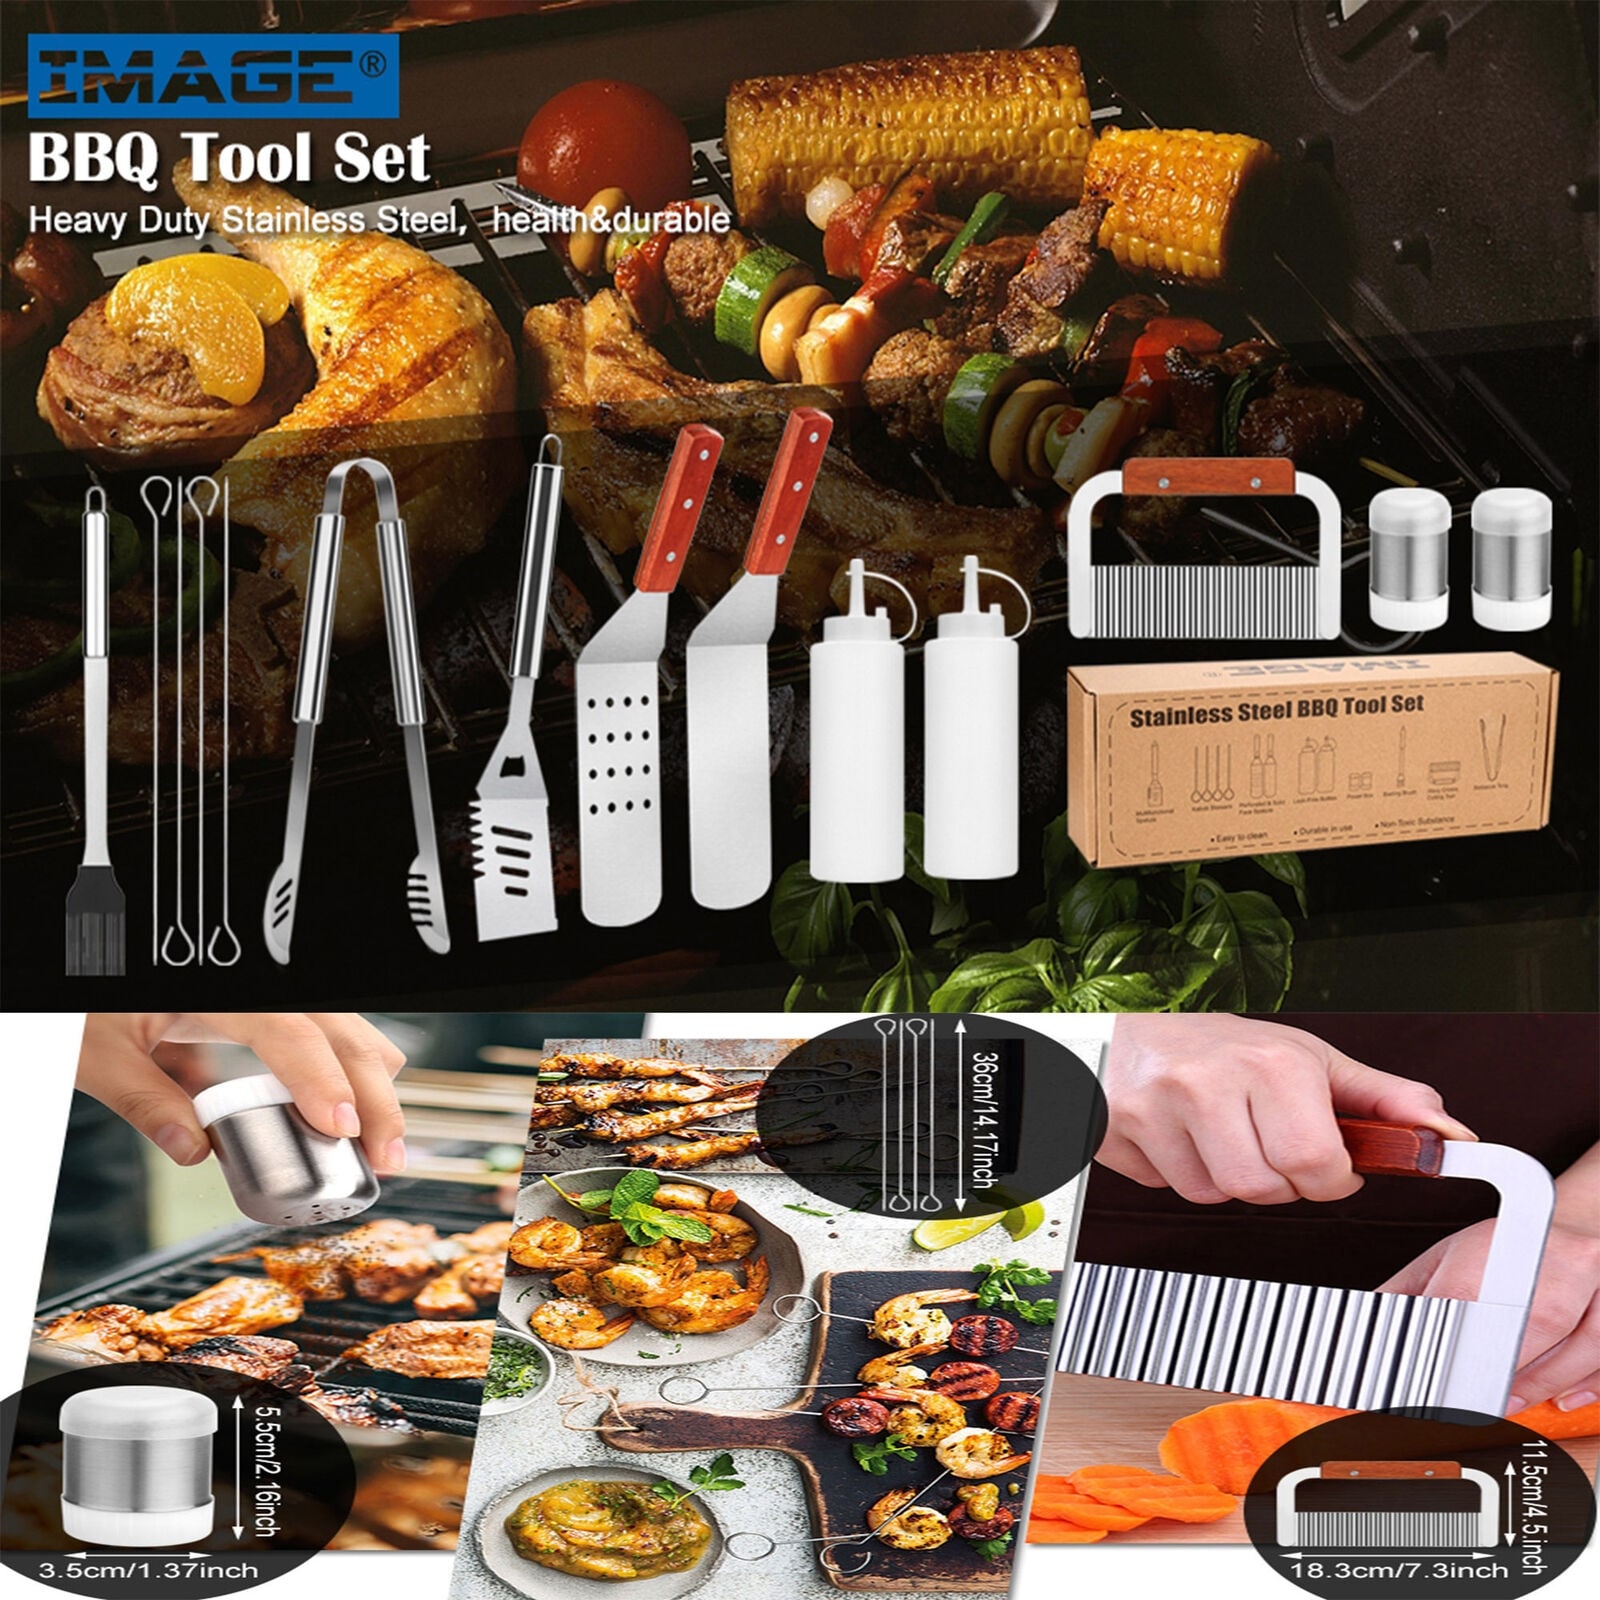 https://ak1.ostkcdn.com/images/products/is/images/direct/f8c36028baca0e882786778e949568bb57845797/BBQ-tool-sets-%2C-BBQ-tool-Grilling-Accessories-Flat-Top-Stainless-Steel-Spatulas-Barbecue-Kit.jpg